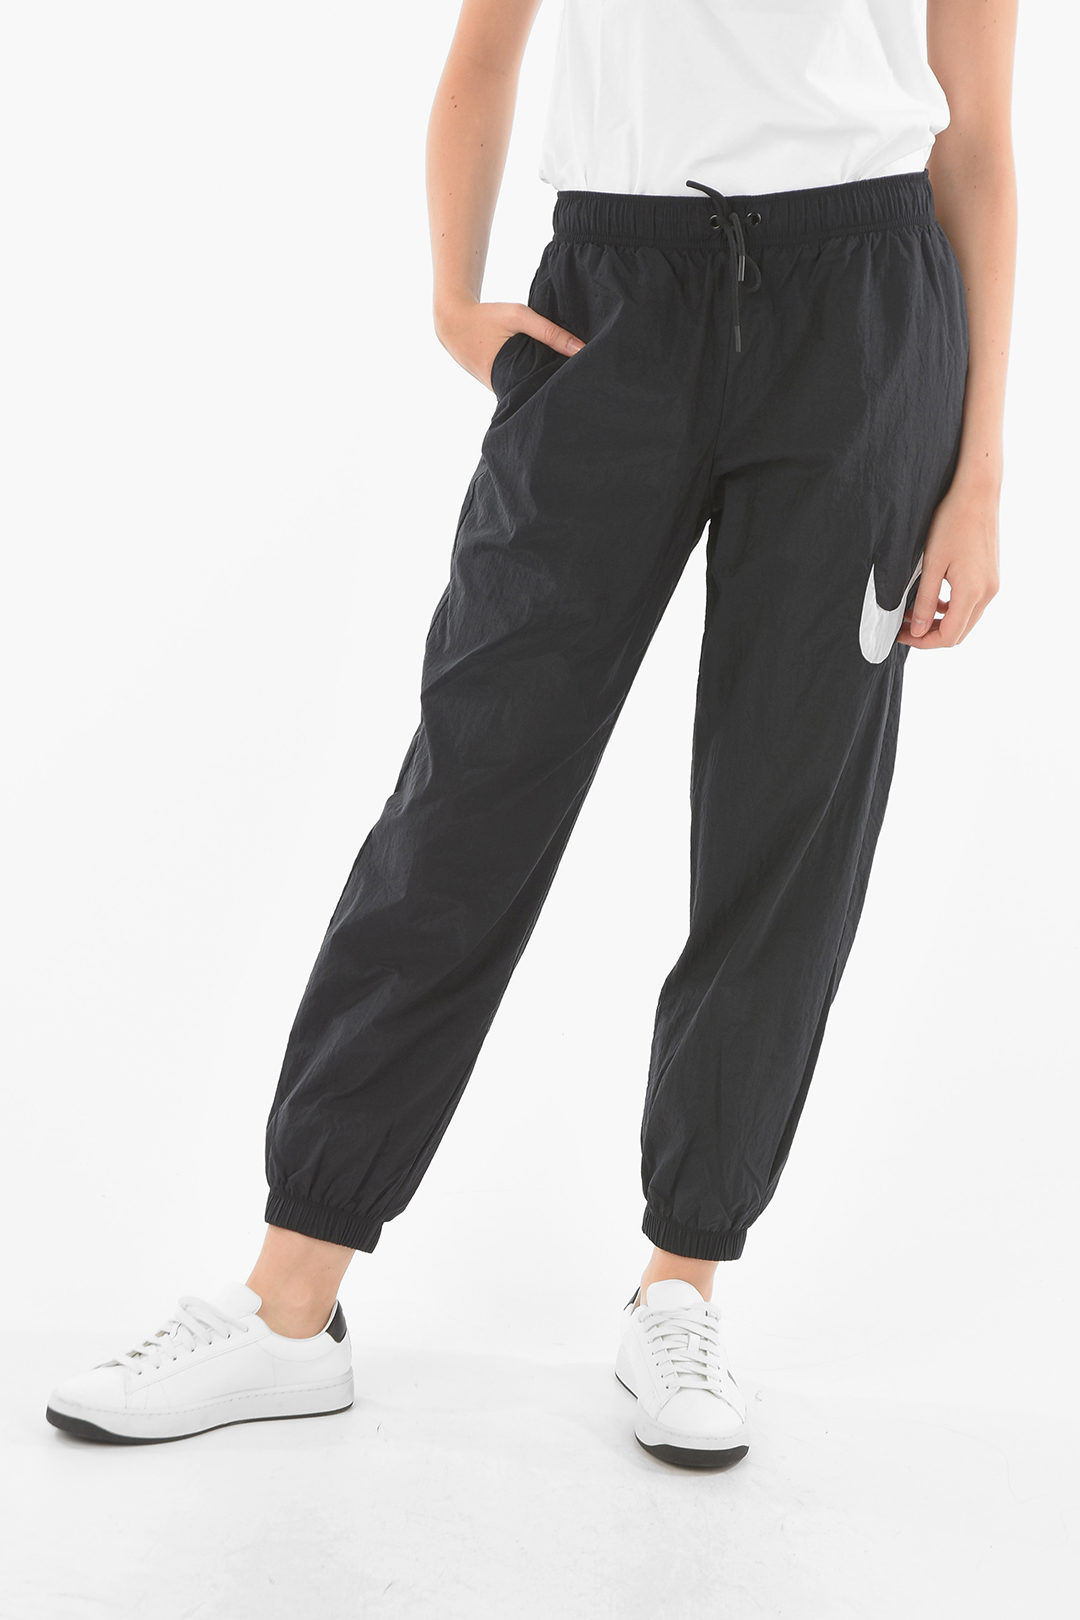 Nike Mid Waist LOOSE FIT Contrasting women - Glamood Outlet